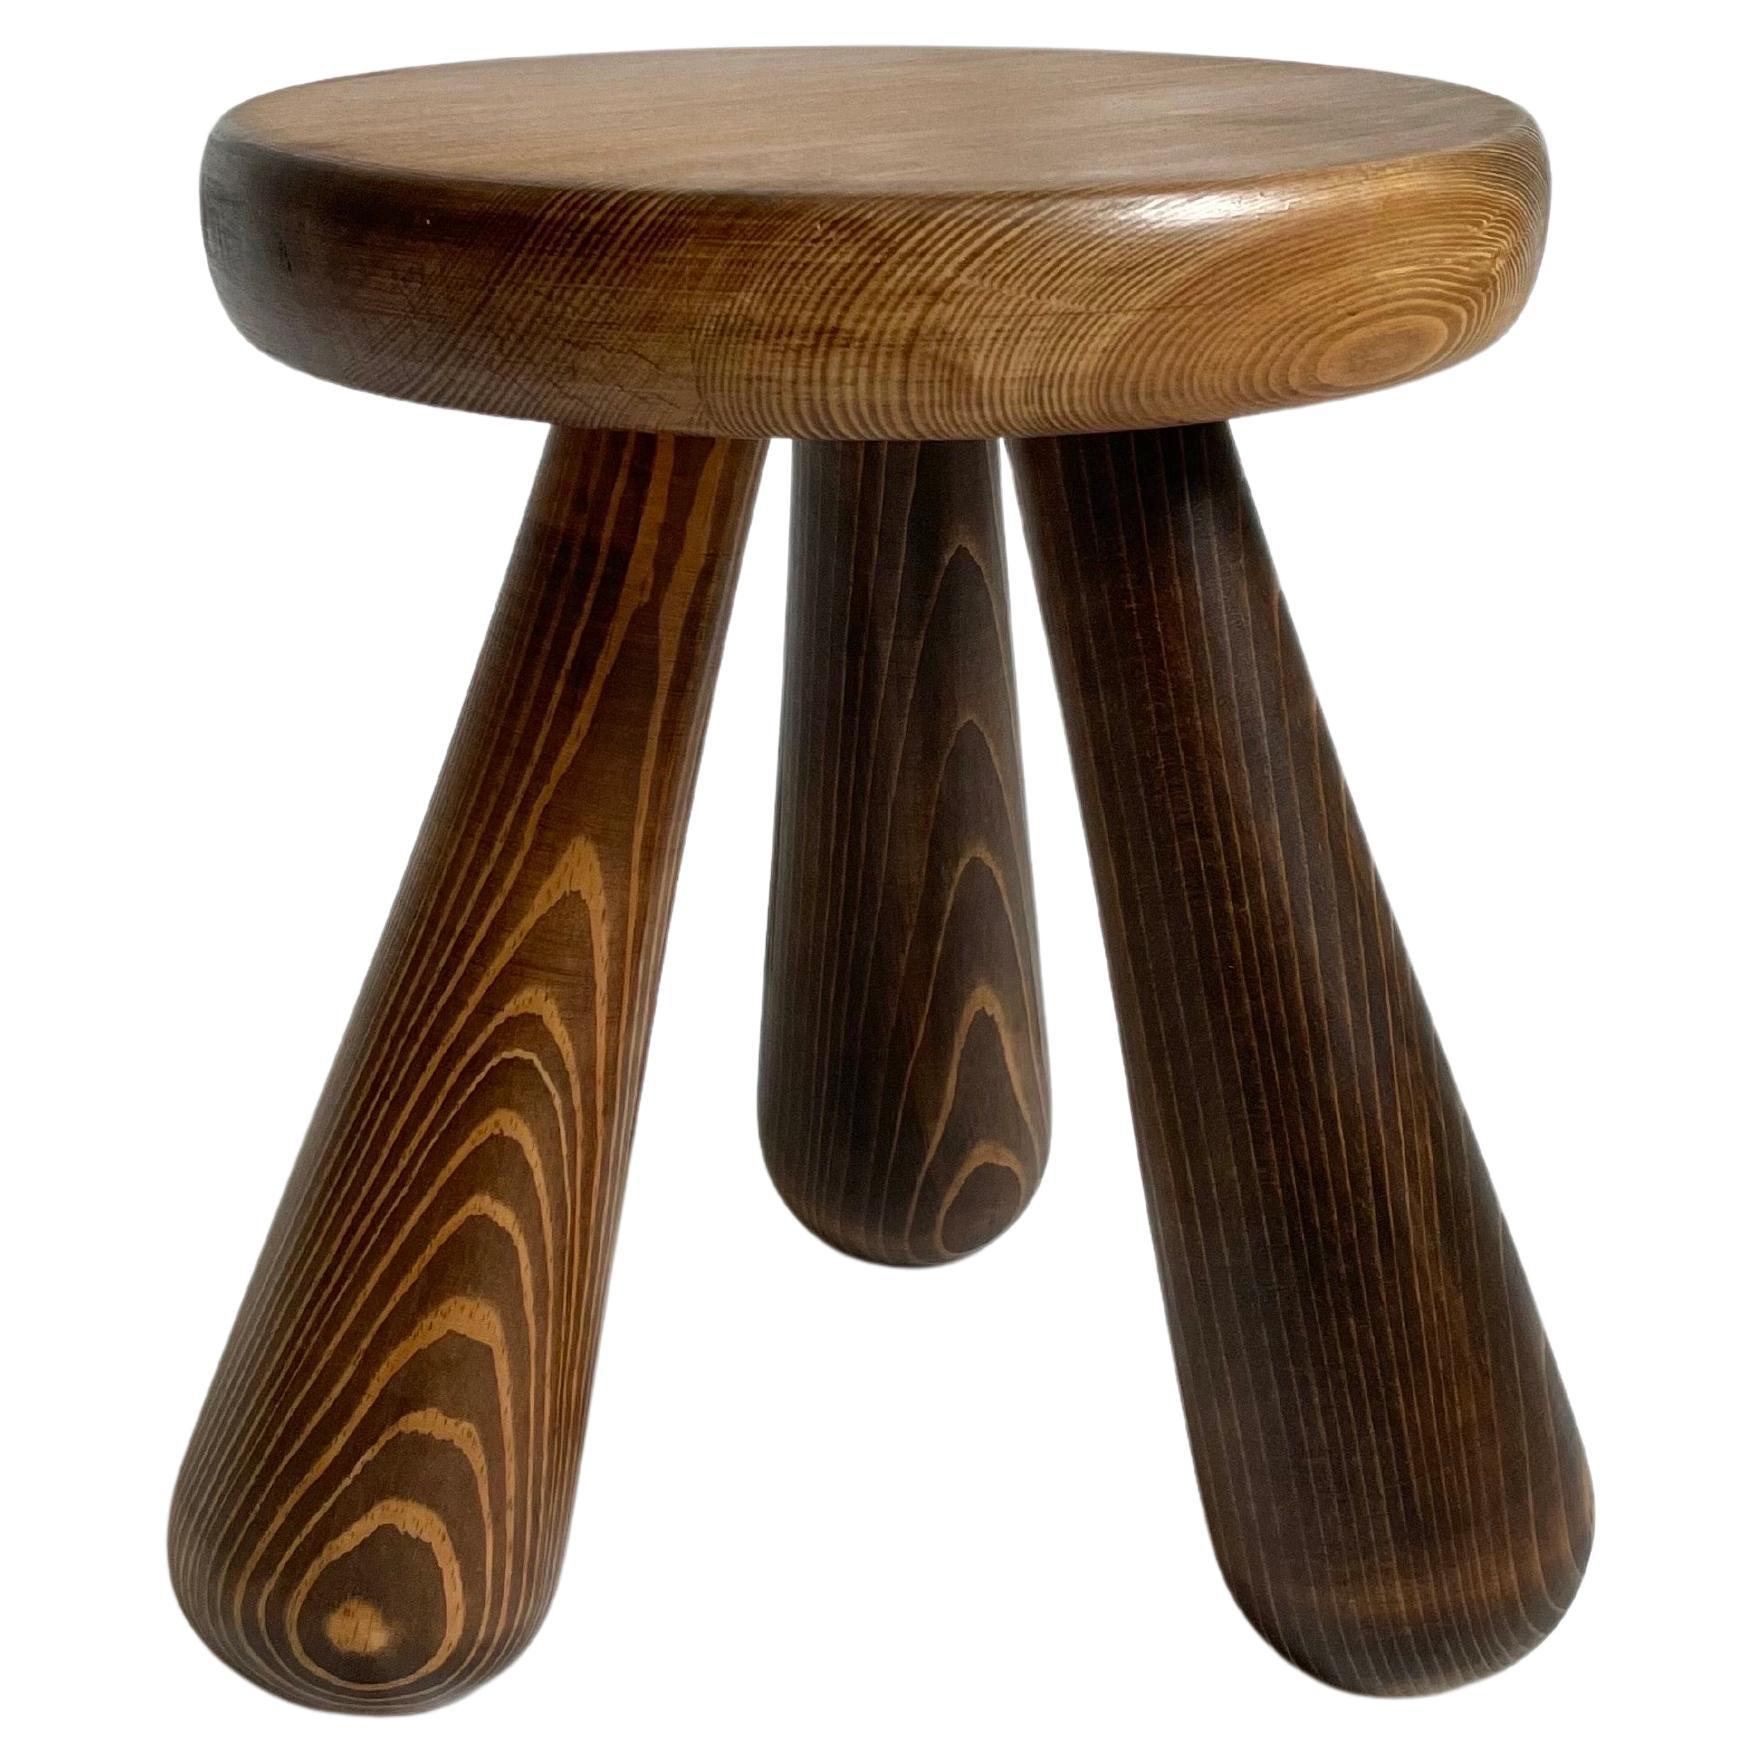 Swedish Country Wooden Foot Stool For Sale